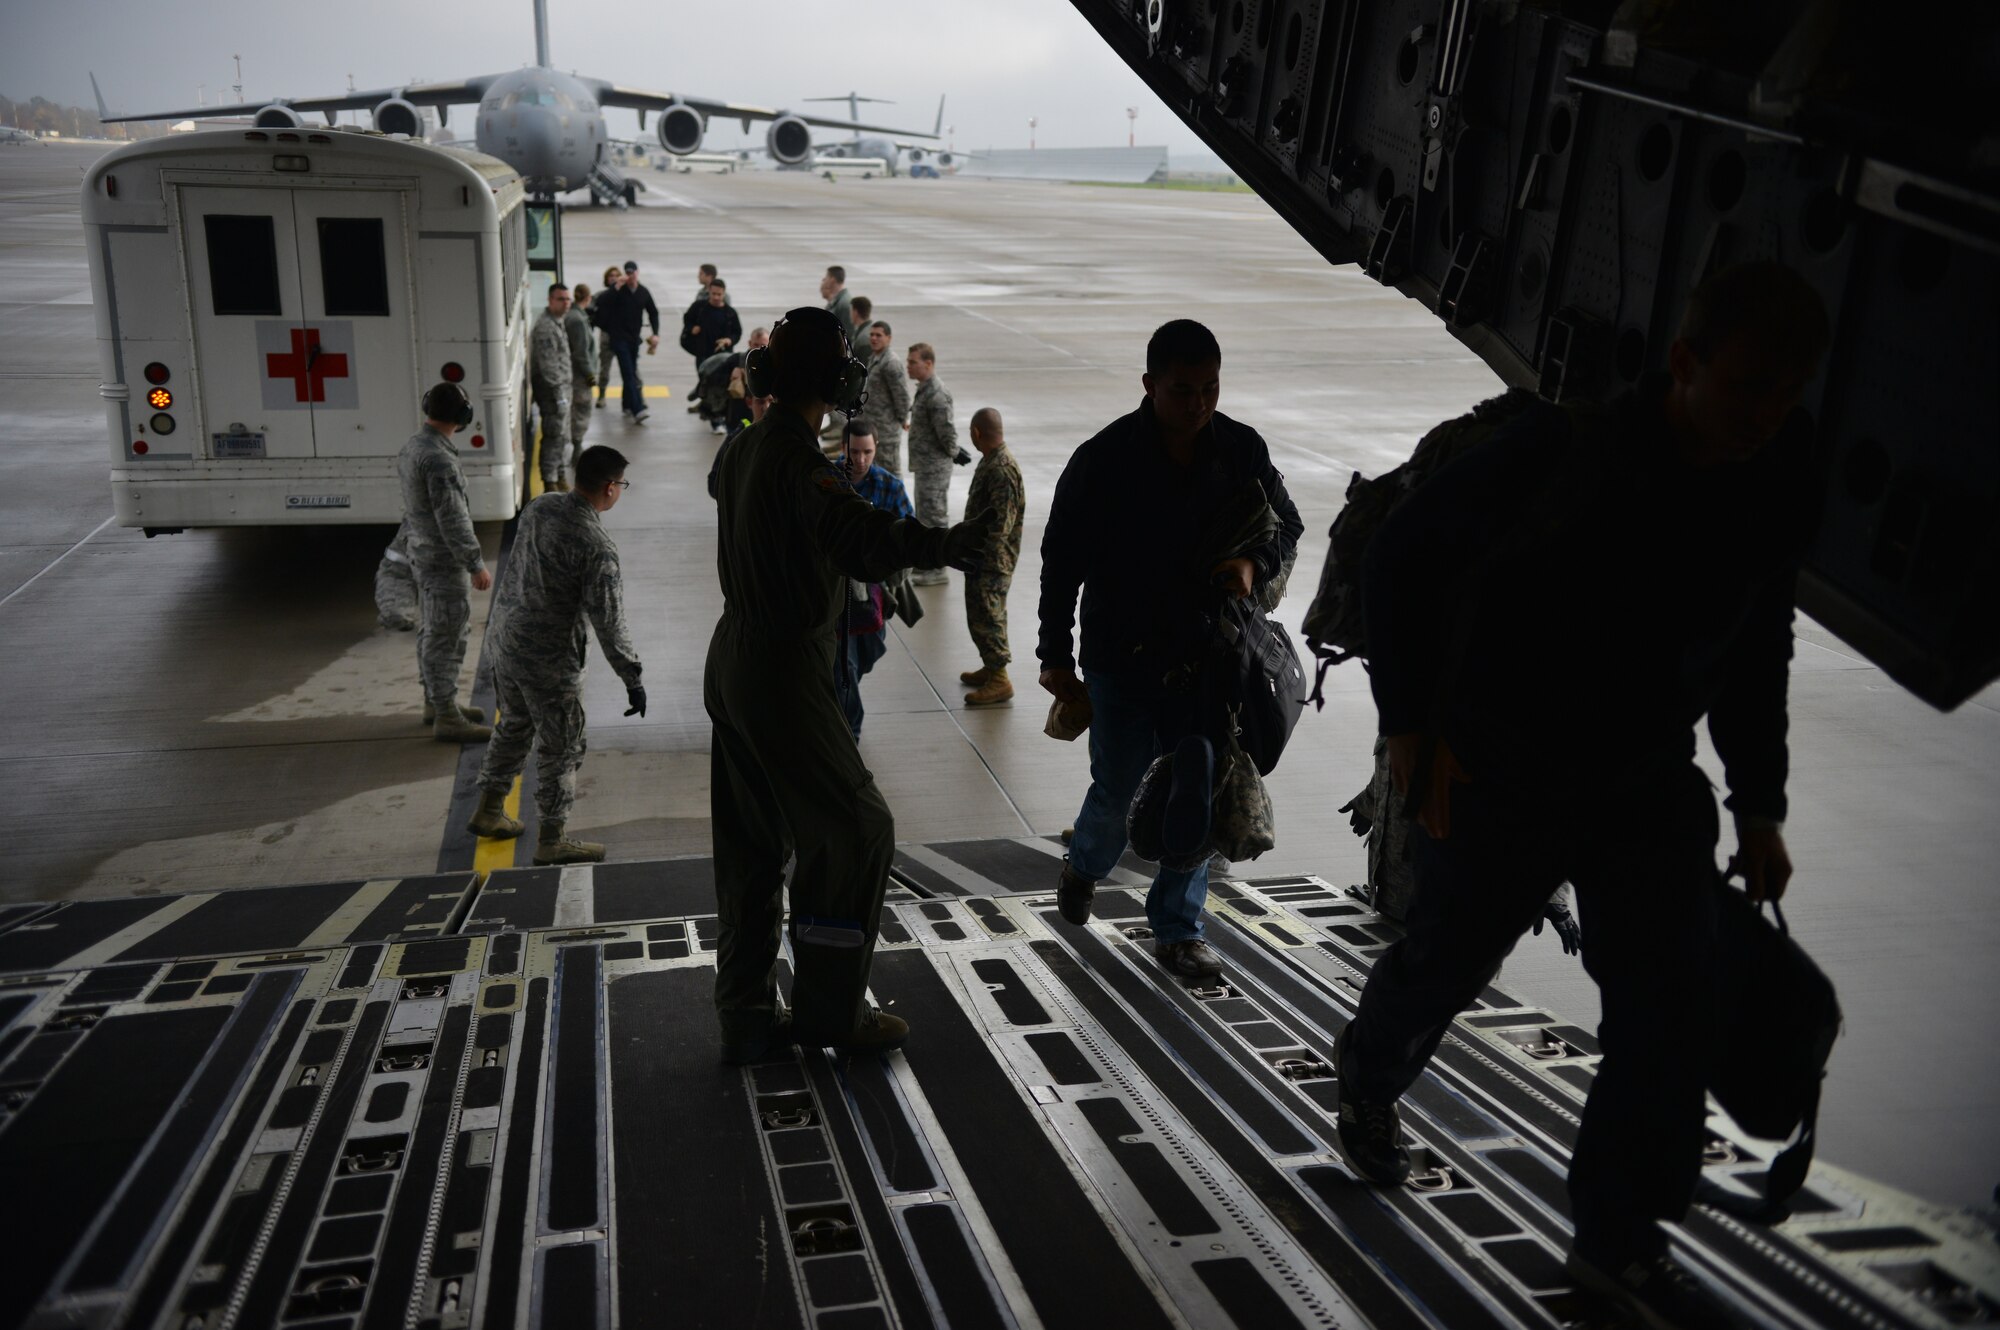 Volunteers and Contingency Aeromedical Staging Facility members assist with loading patients on an aircraft bound for the U.S. on Ramstein Air Base, Germany, Nov. 20, 2014. Airmen at the CASF ensure those injured down range have a smooth transition back home and into the arms of their loved ones. (U.S. Air Force photo/Senior Airman Hailey Haux)